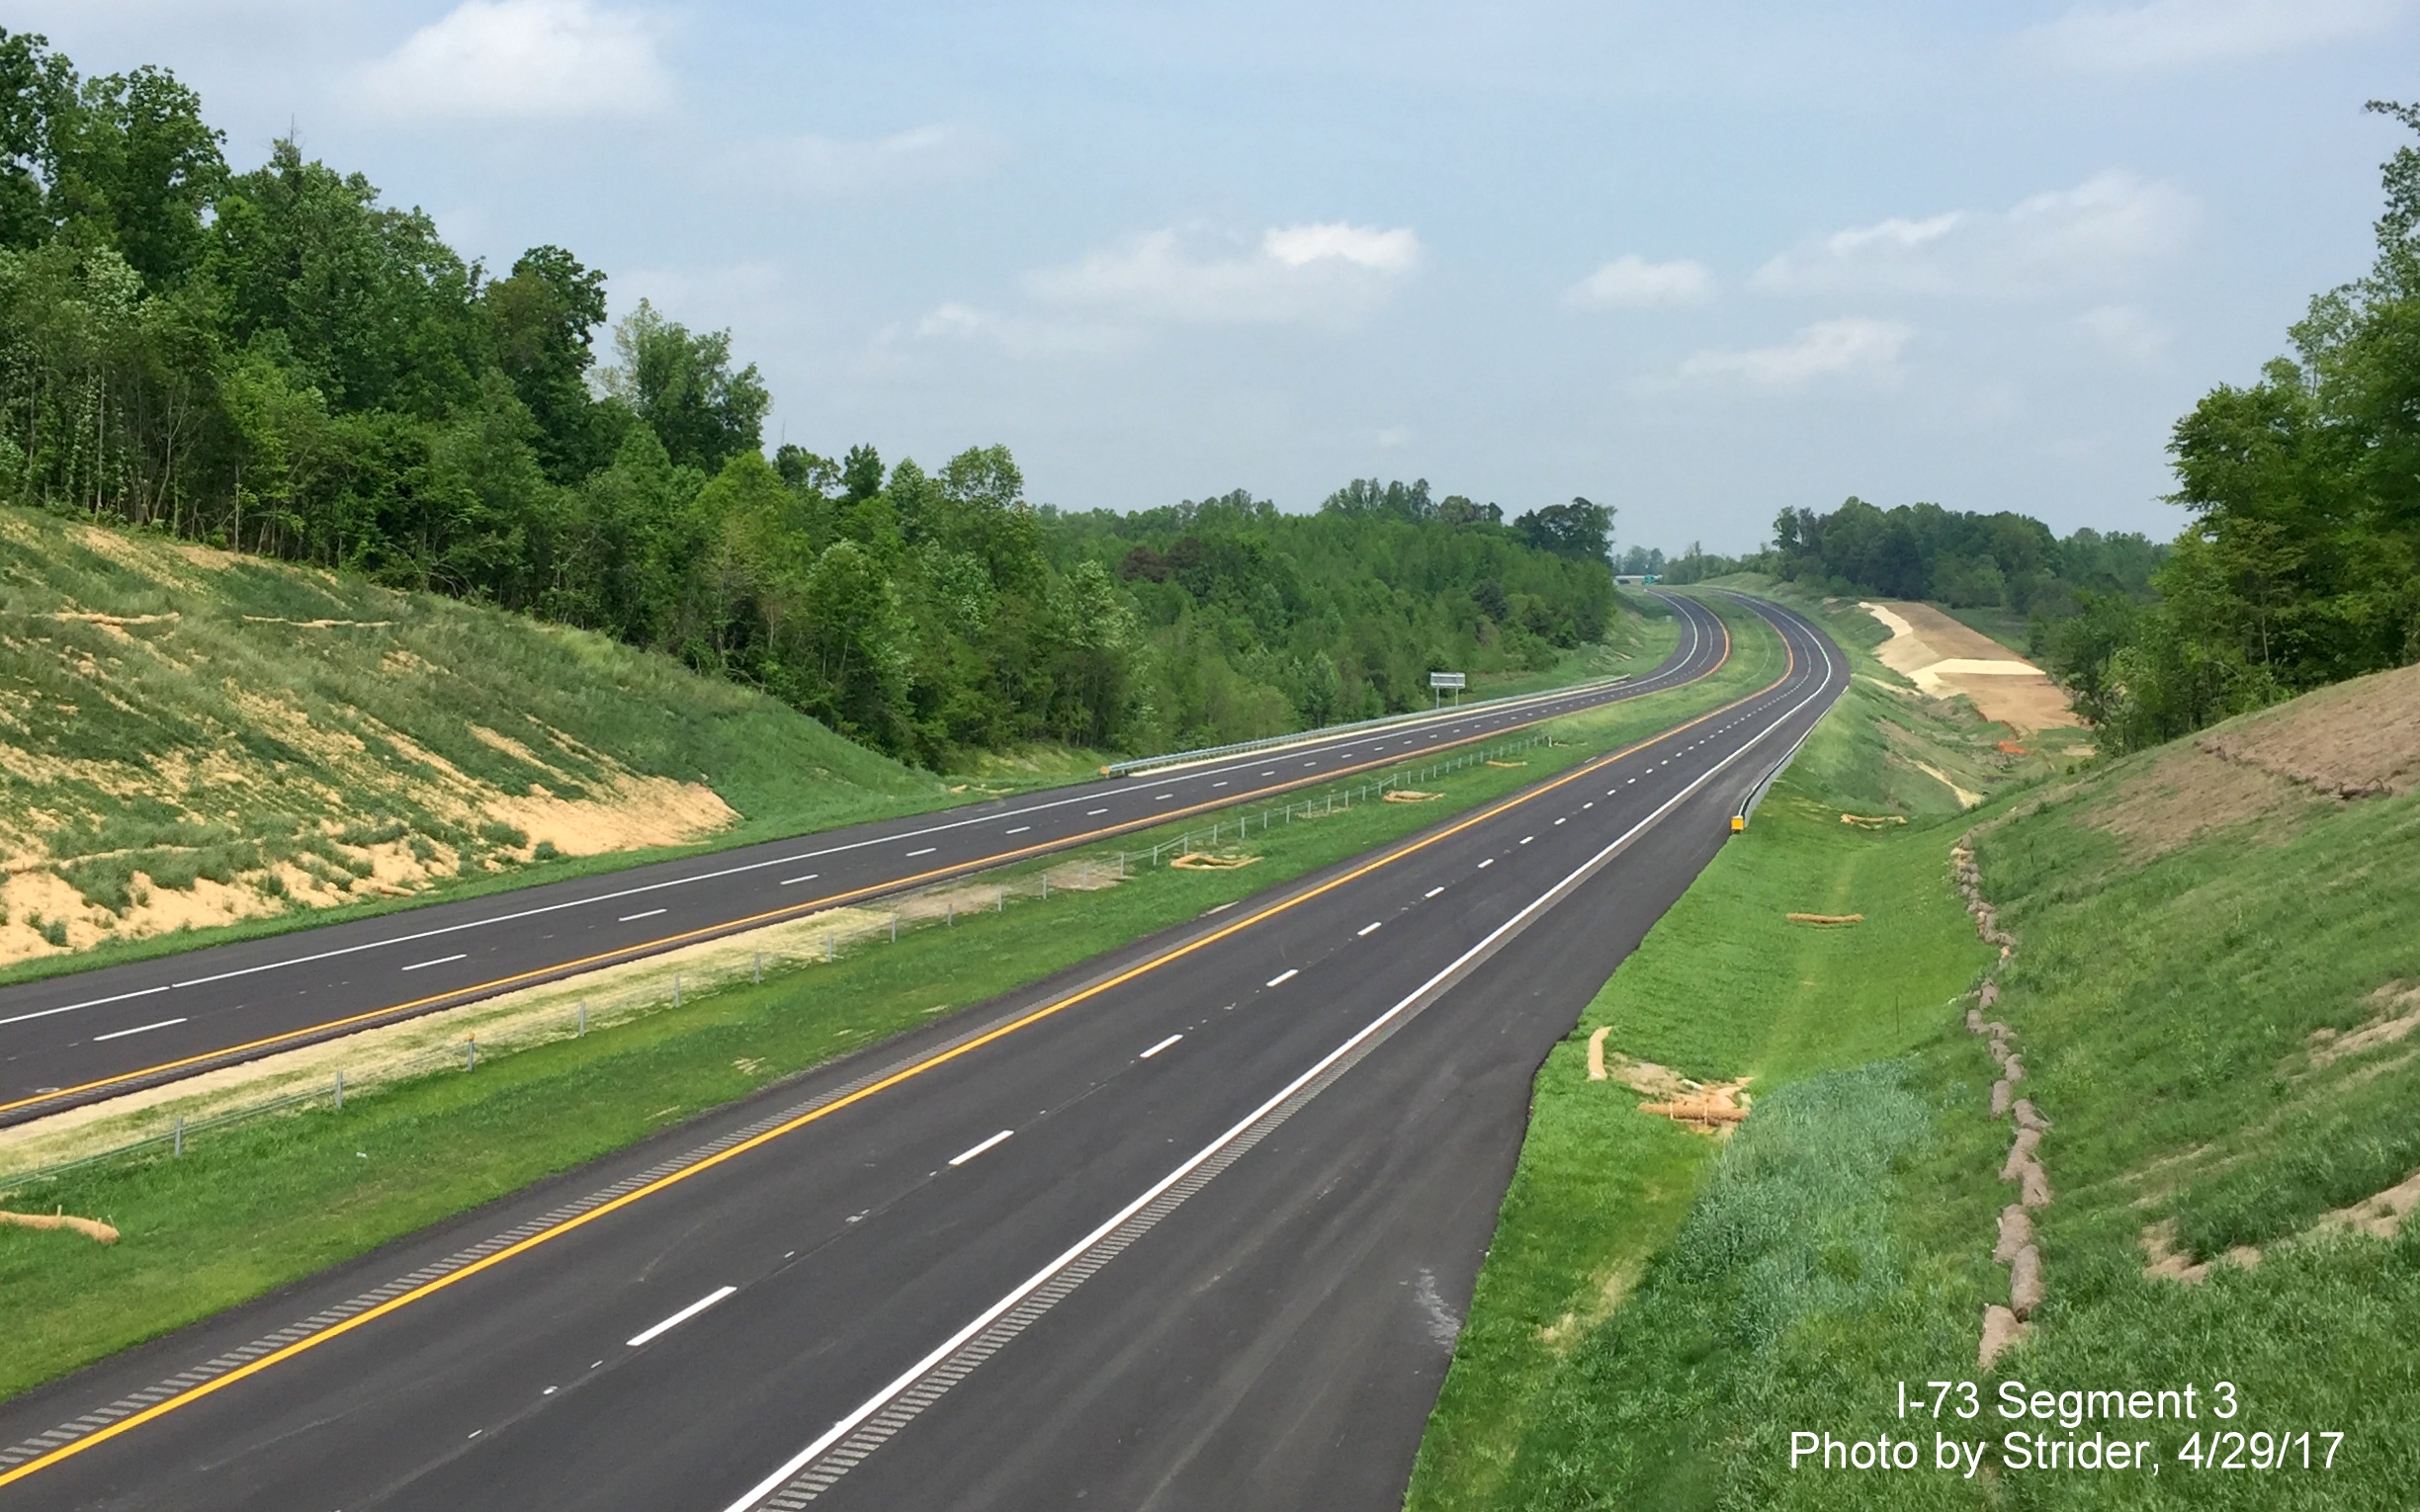 Image taken of view north of Brookbank Rd bridge of nearly completed Future I-73 roadway, by Strider